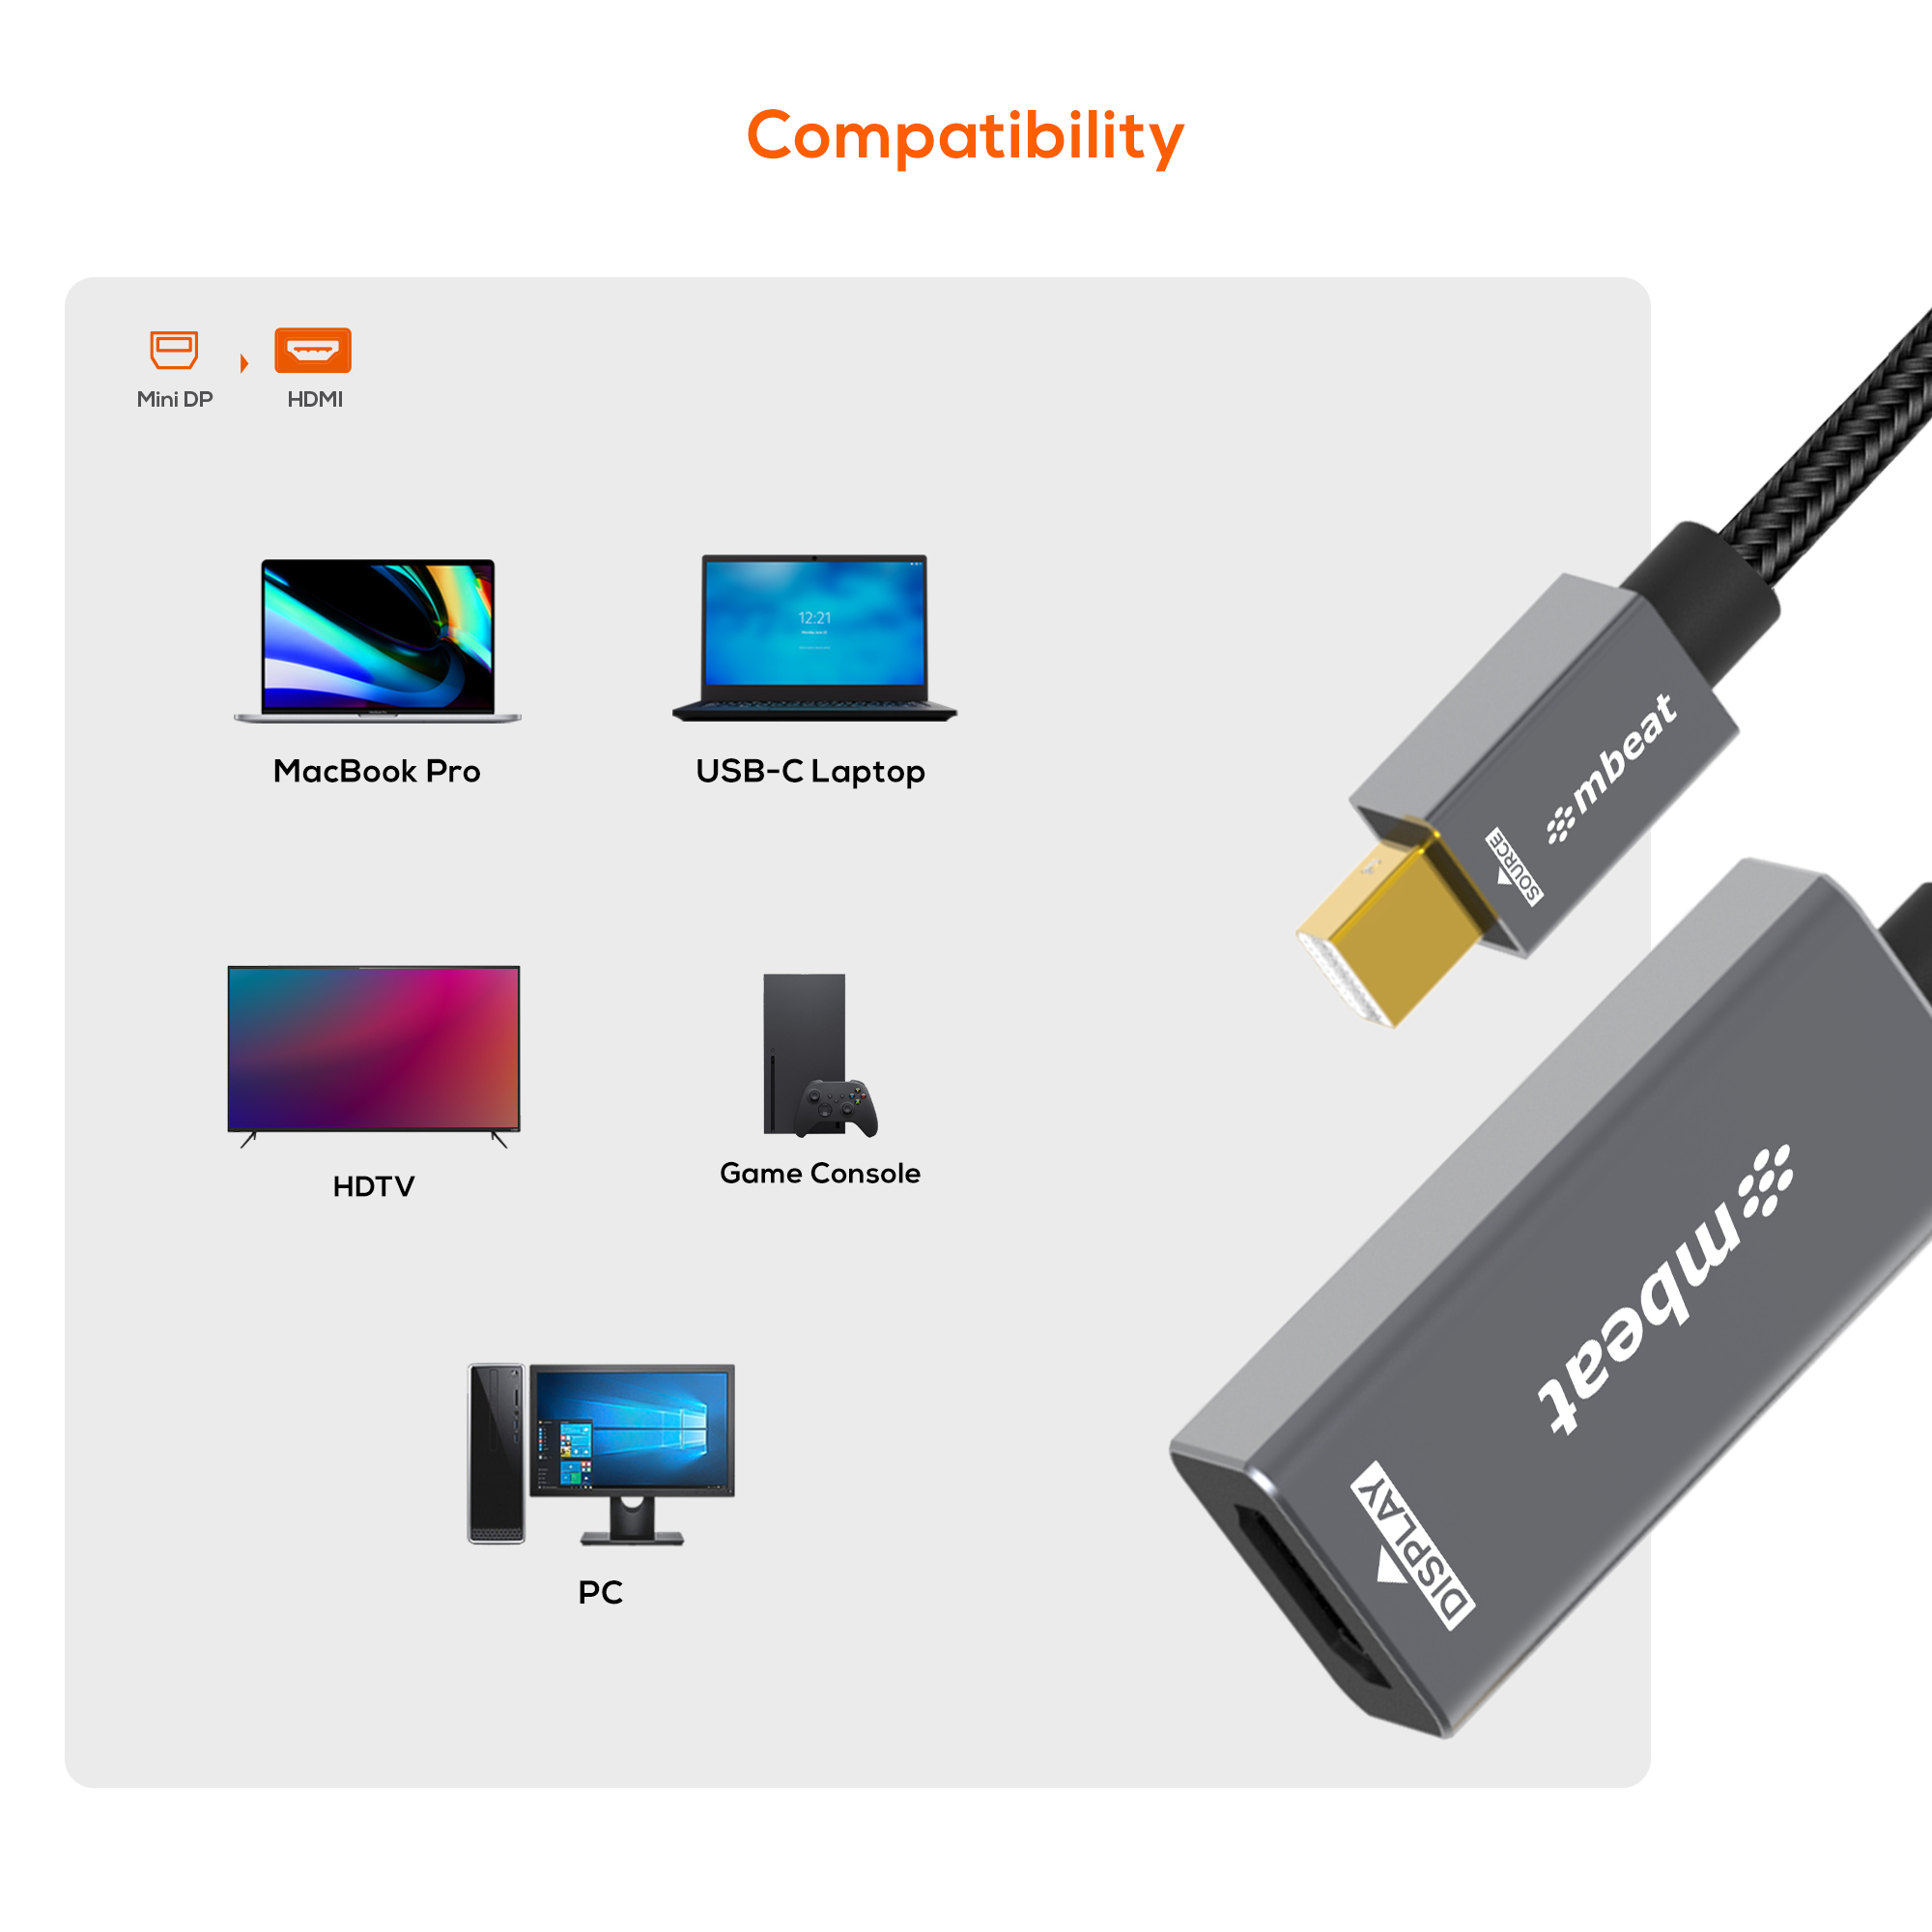 A large marketing image providing additional information about the product mbeat Tough Link Mini DisplayPort to HDMI Adapter - Additional alt info not provided